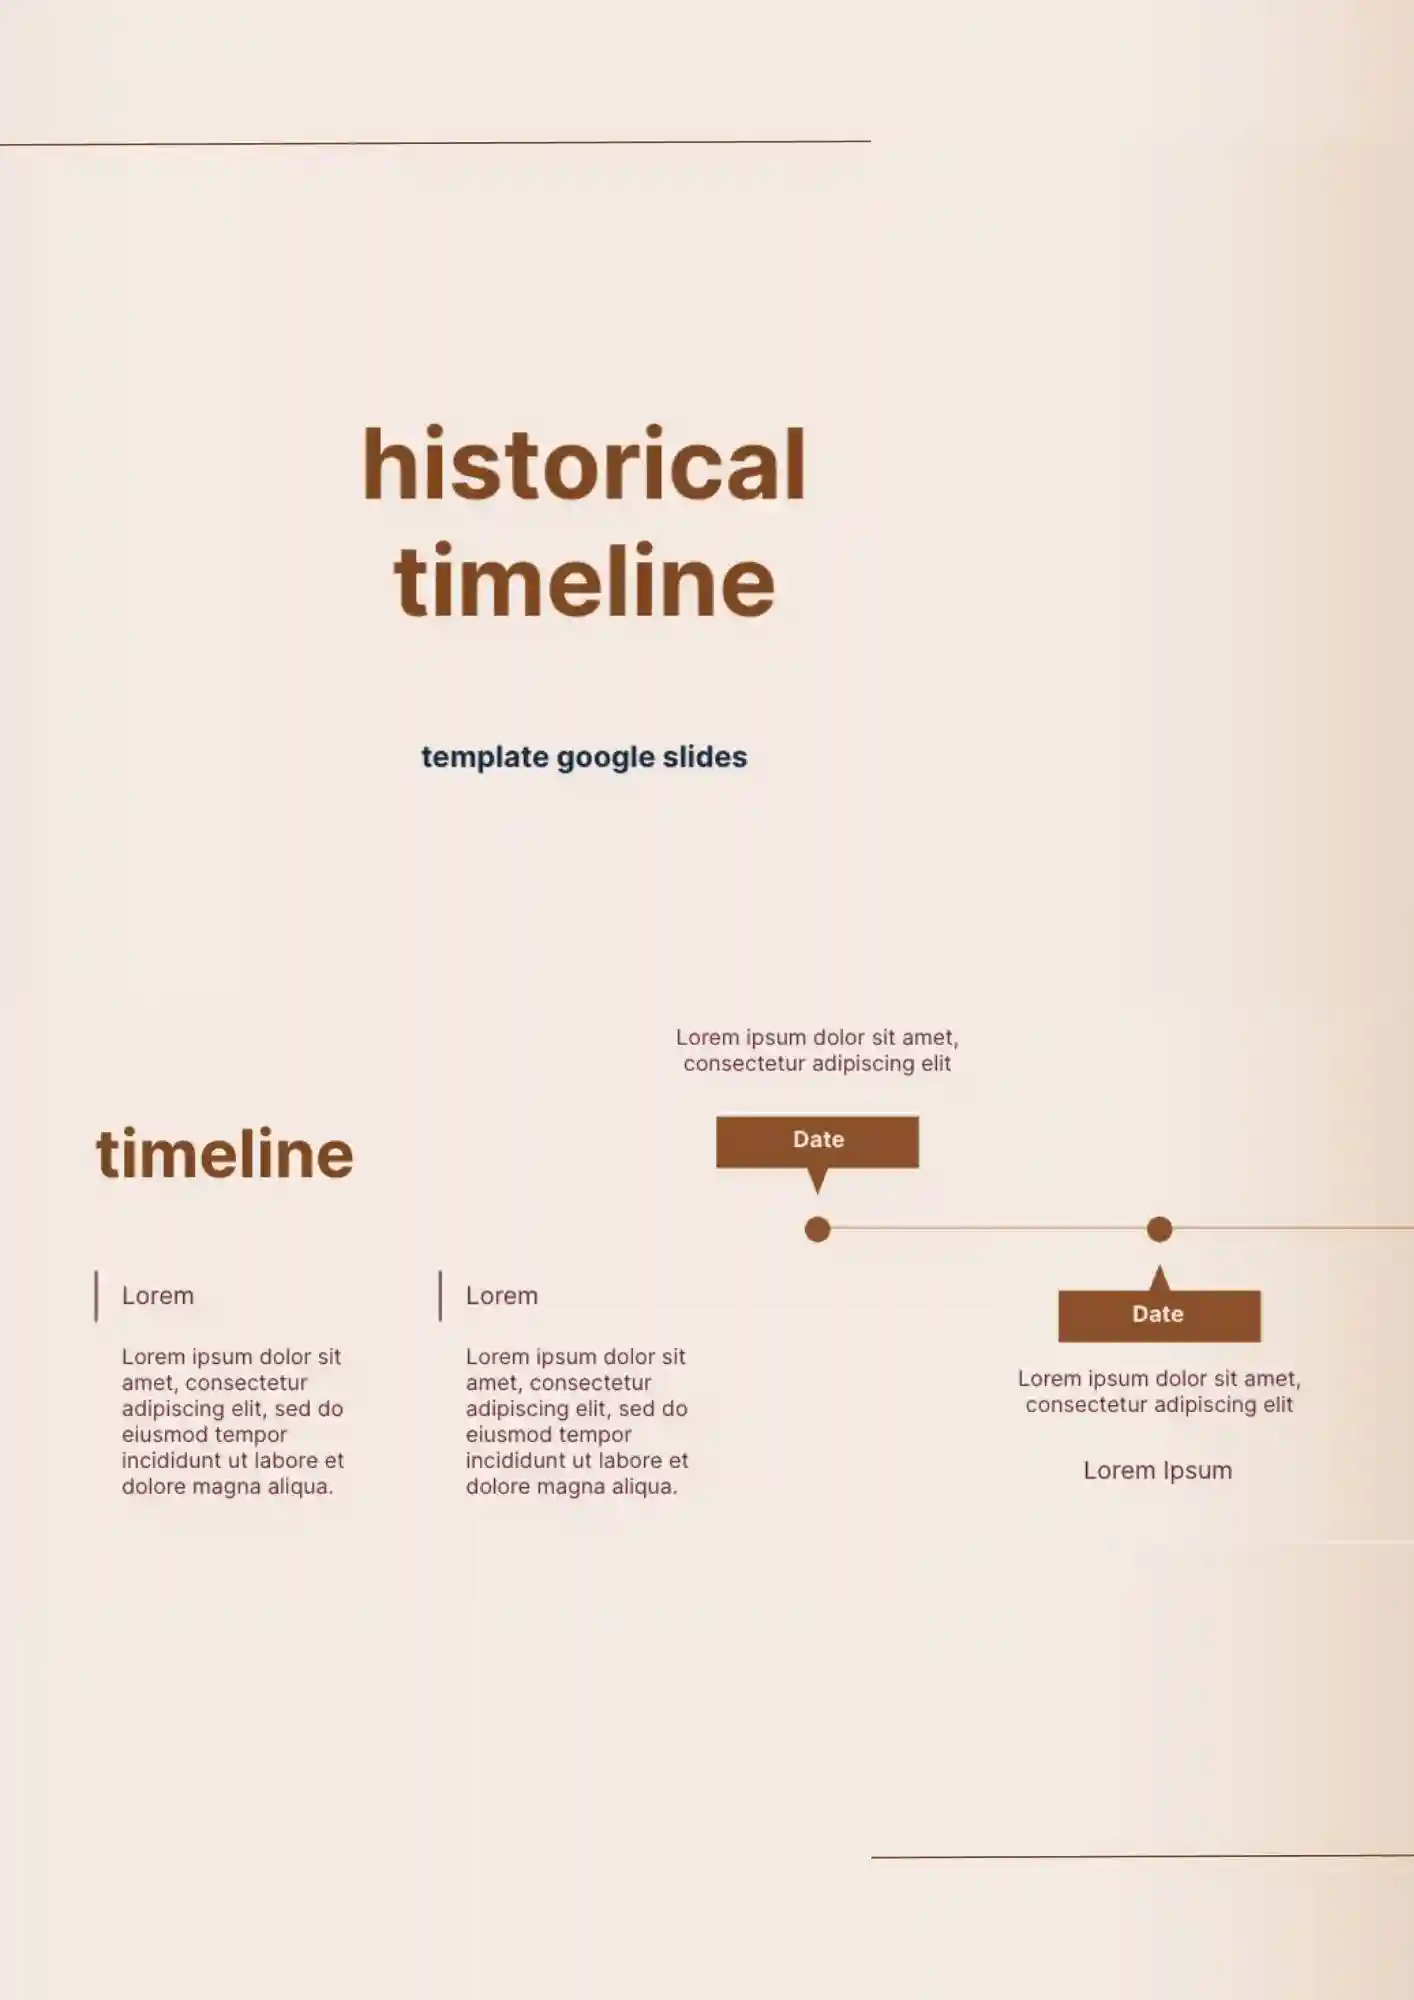 History Timeline Template